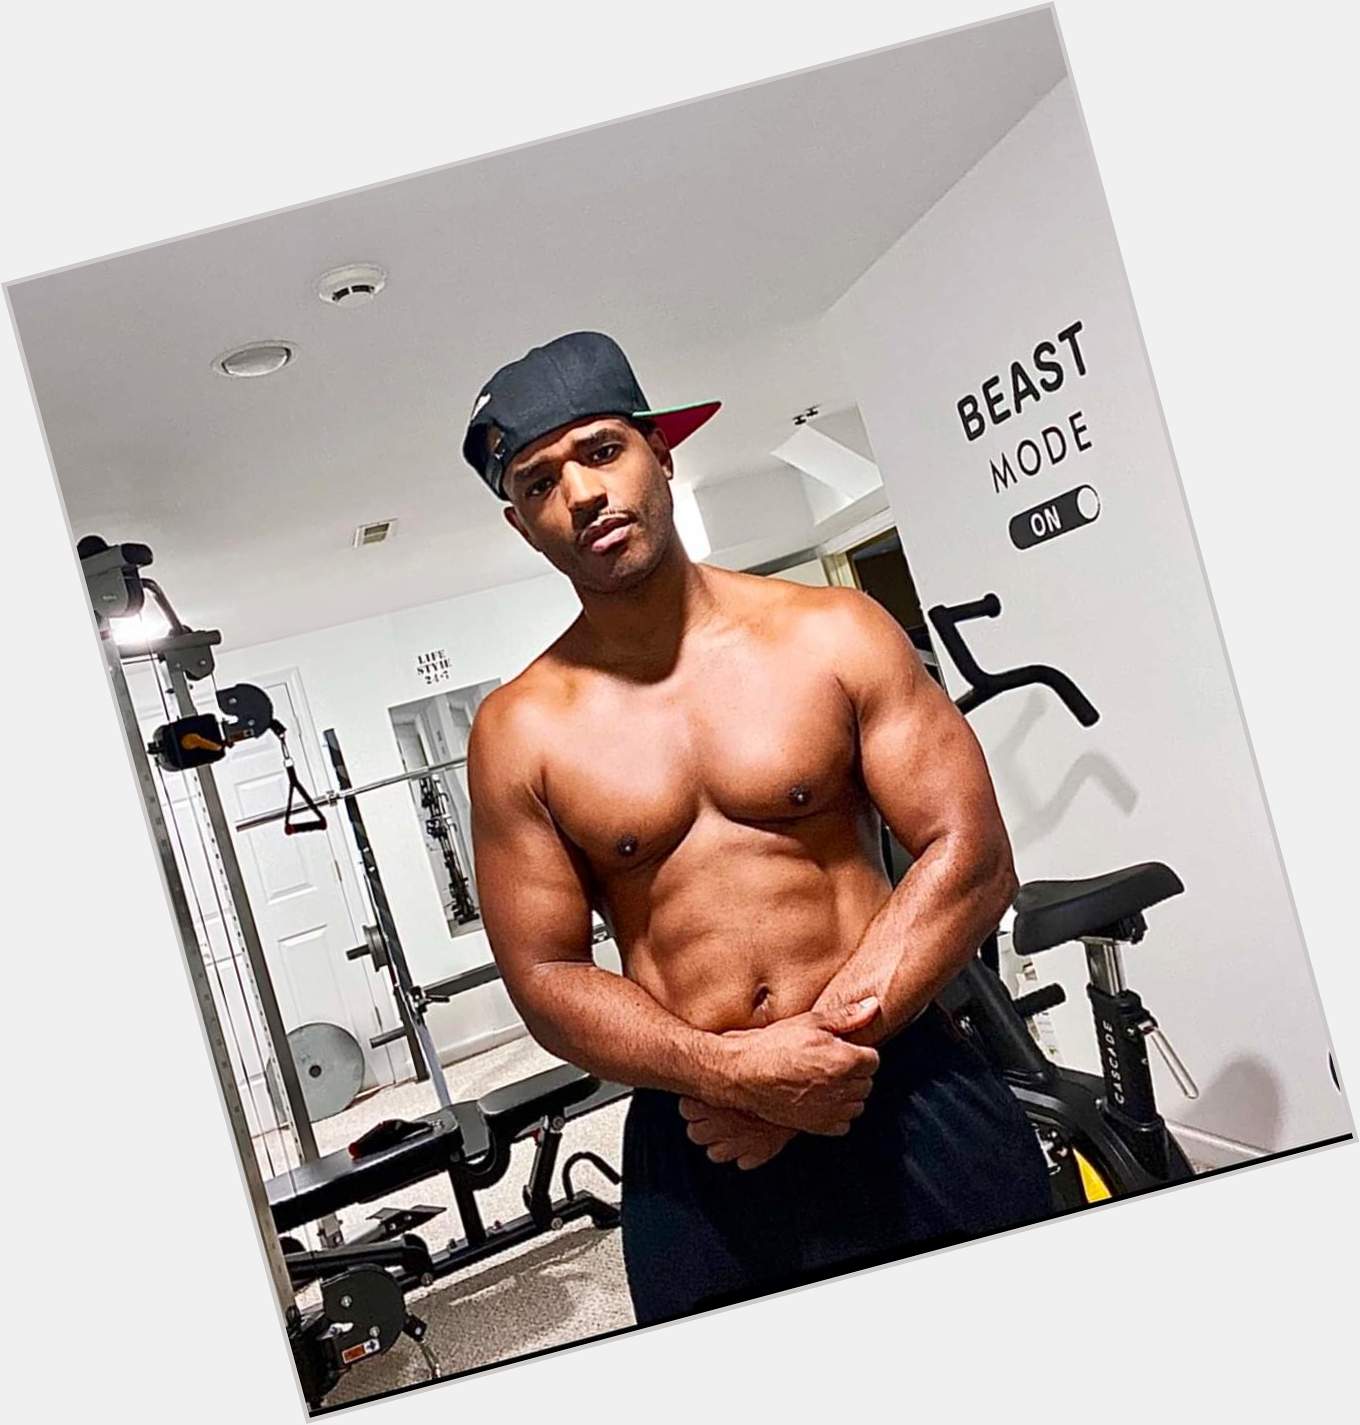 Larenz out here with his nipples out on his birthday! Lawd!  Happy Happy birthday, Larenz Tate 